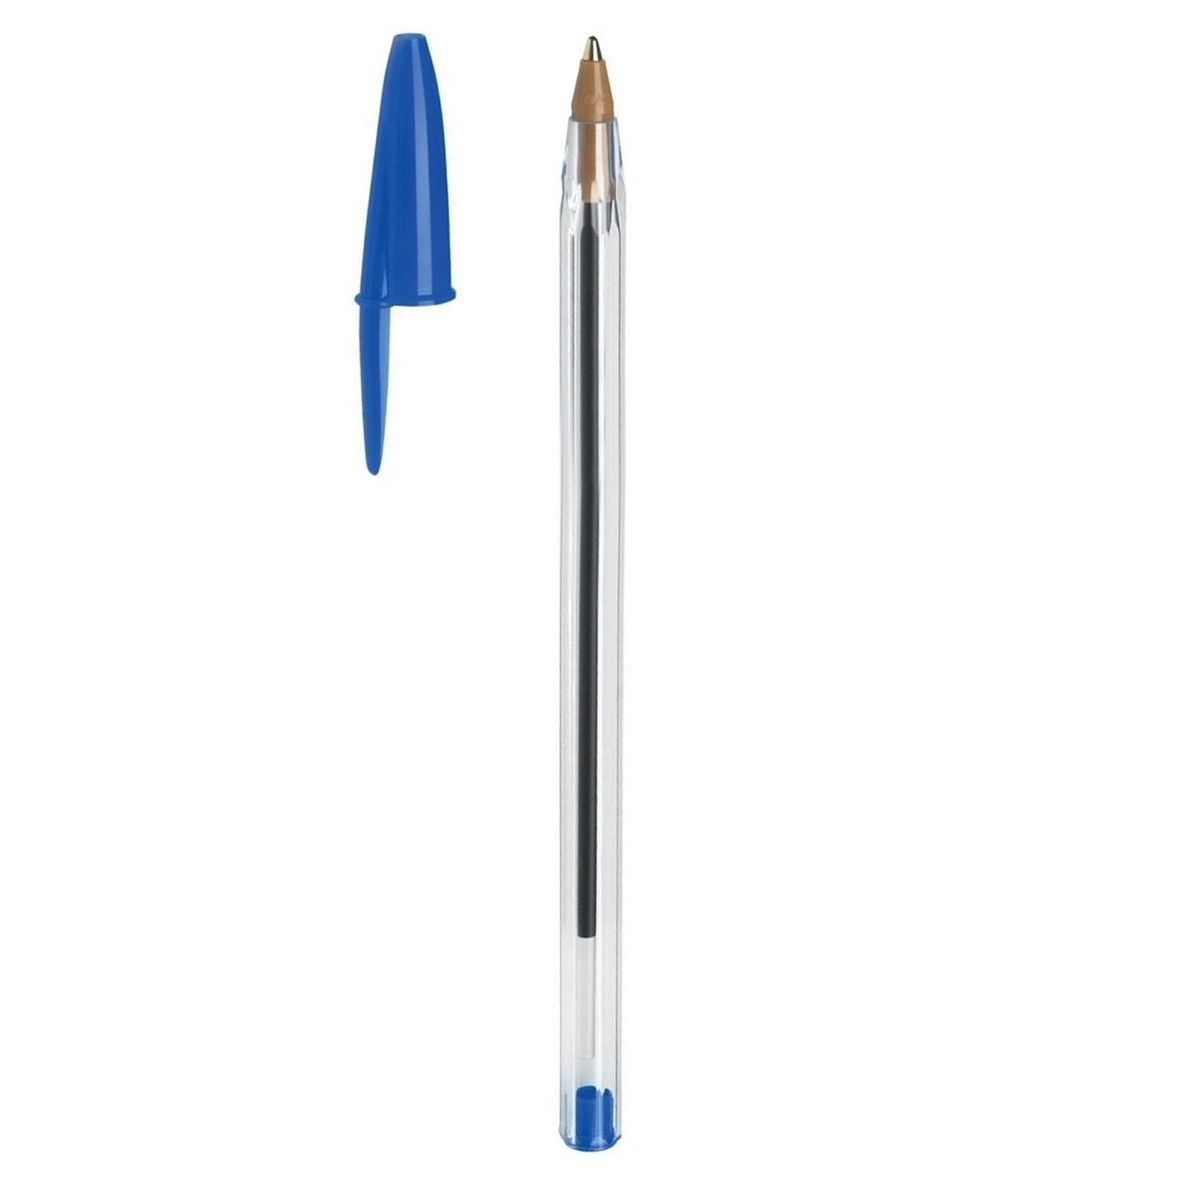 Have to Have - bic pen - Have to Have - betaalbare